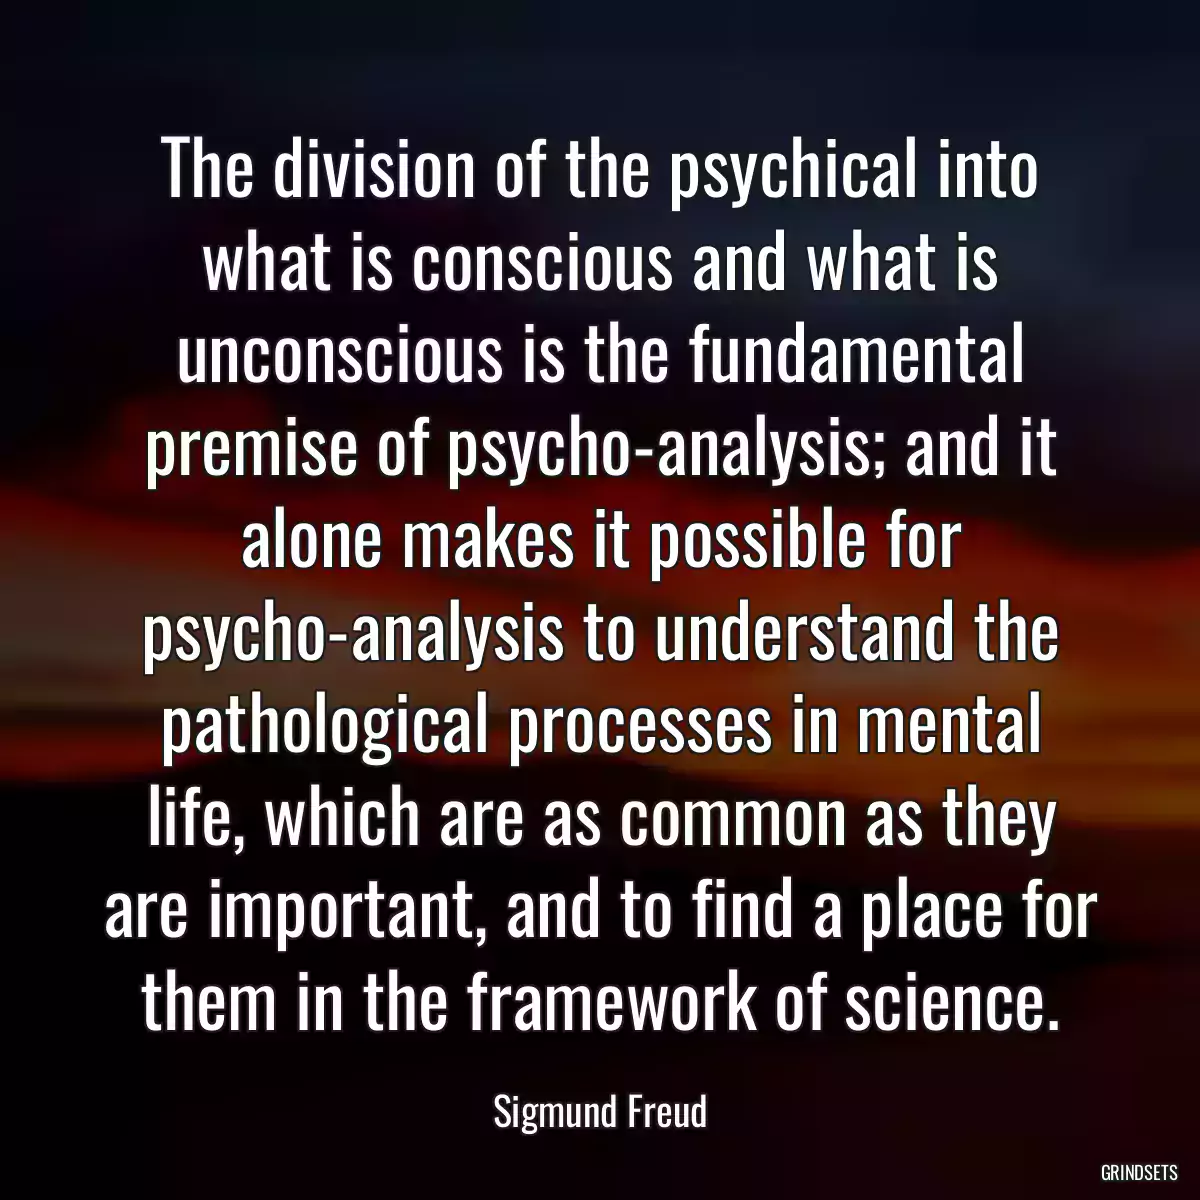 The division of the psychical into what is conscious and what is unconscious is the fundamental premise of psycho-analysis; and it alone makes it possible for psycho-analysis to understand the pathological processes in mental life, which are as common as they are important, and to find a place for them in the framework of science.